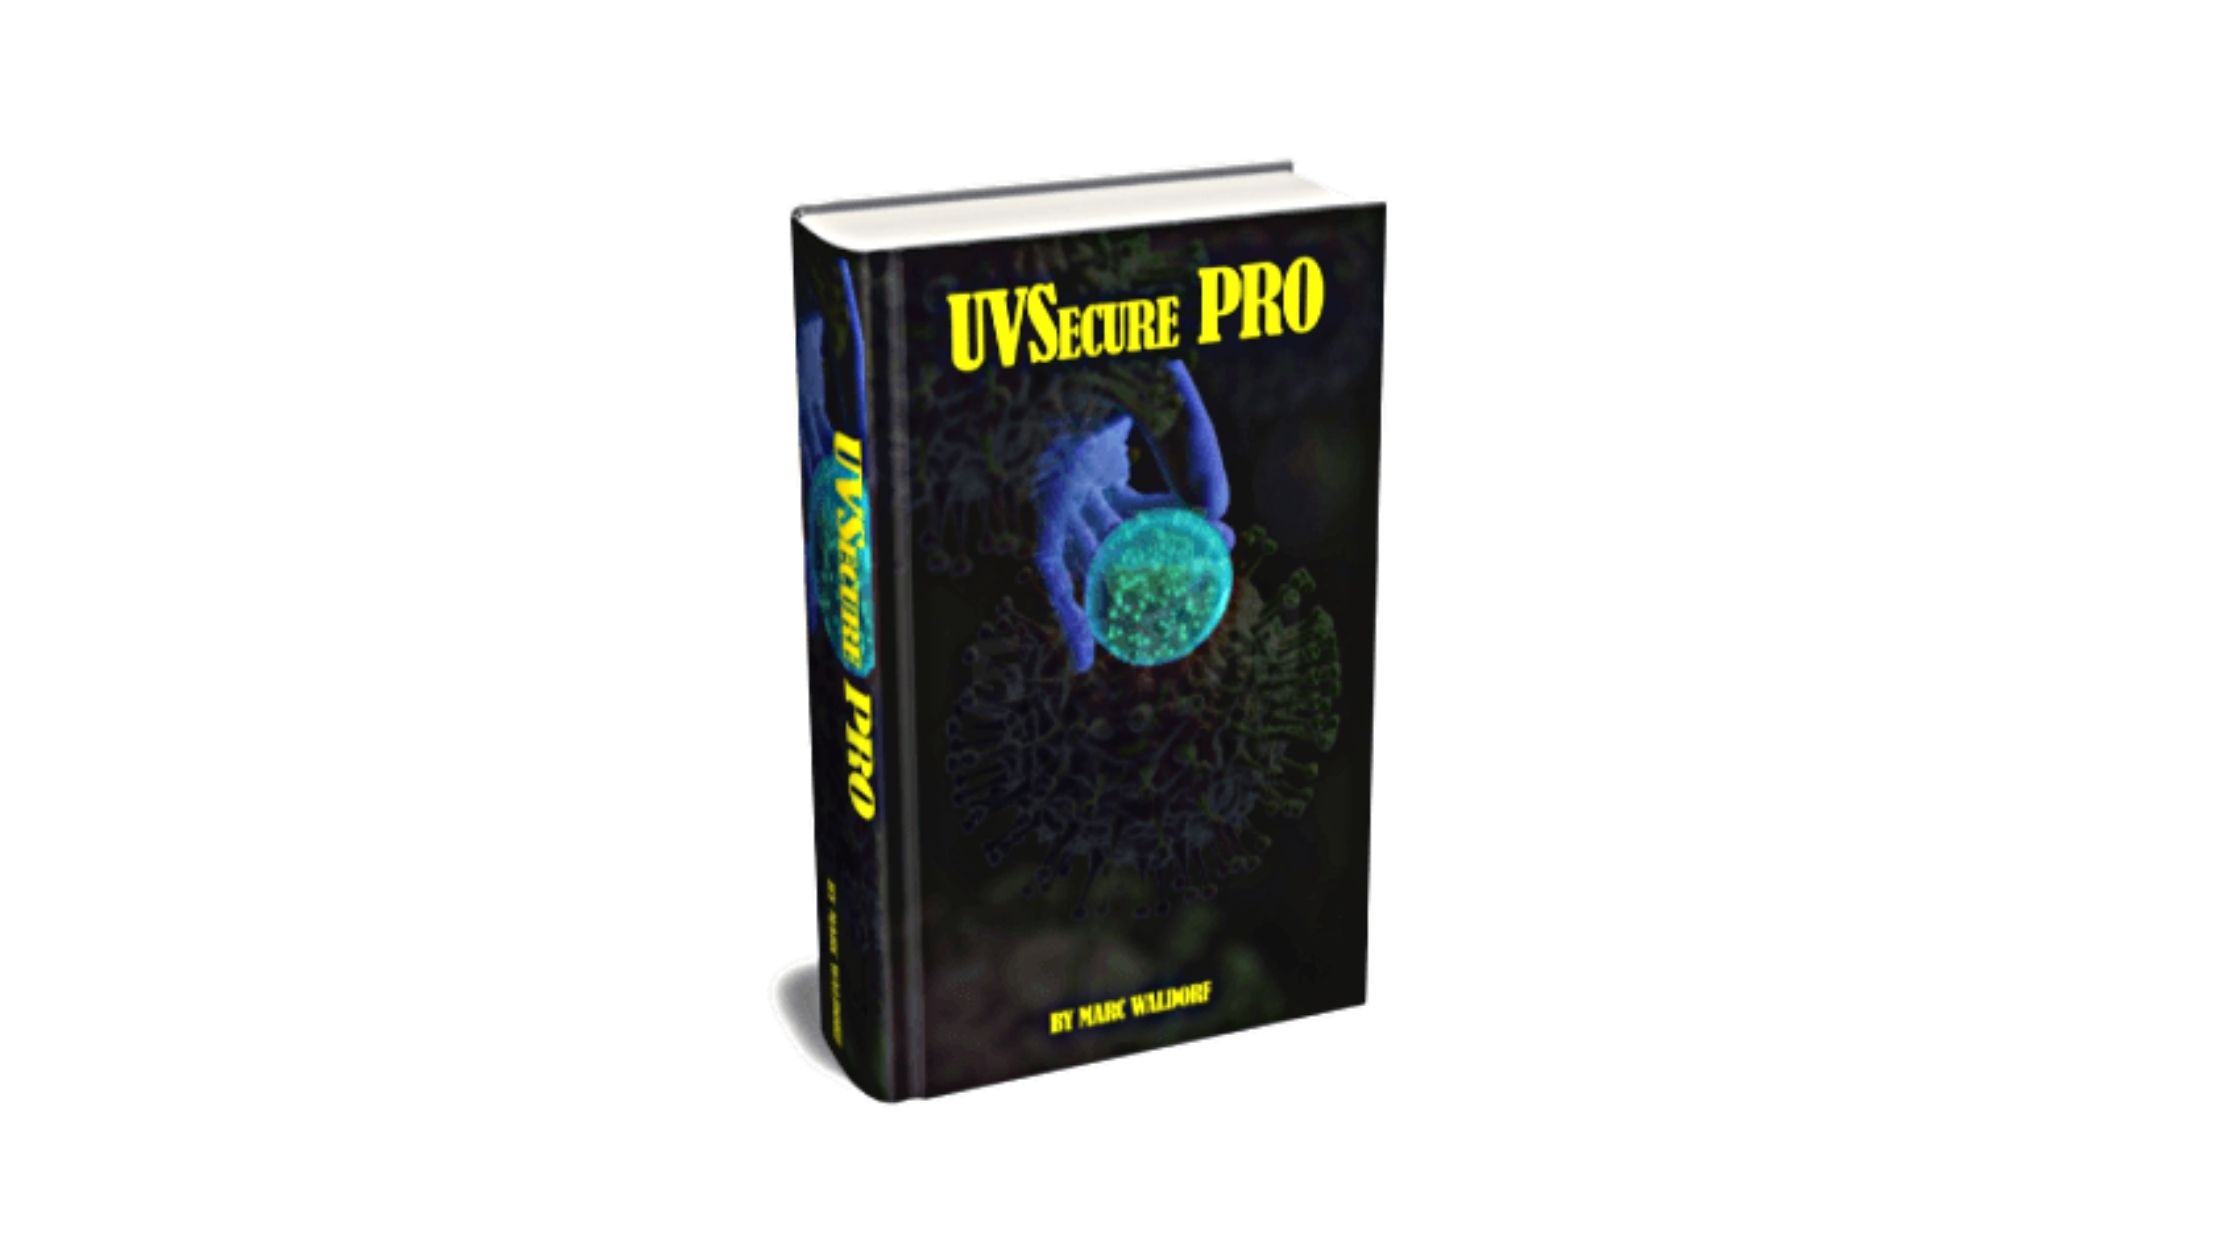 UVSecure Pro Reviews 2